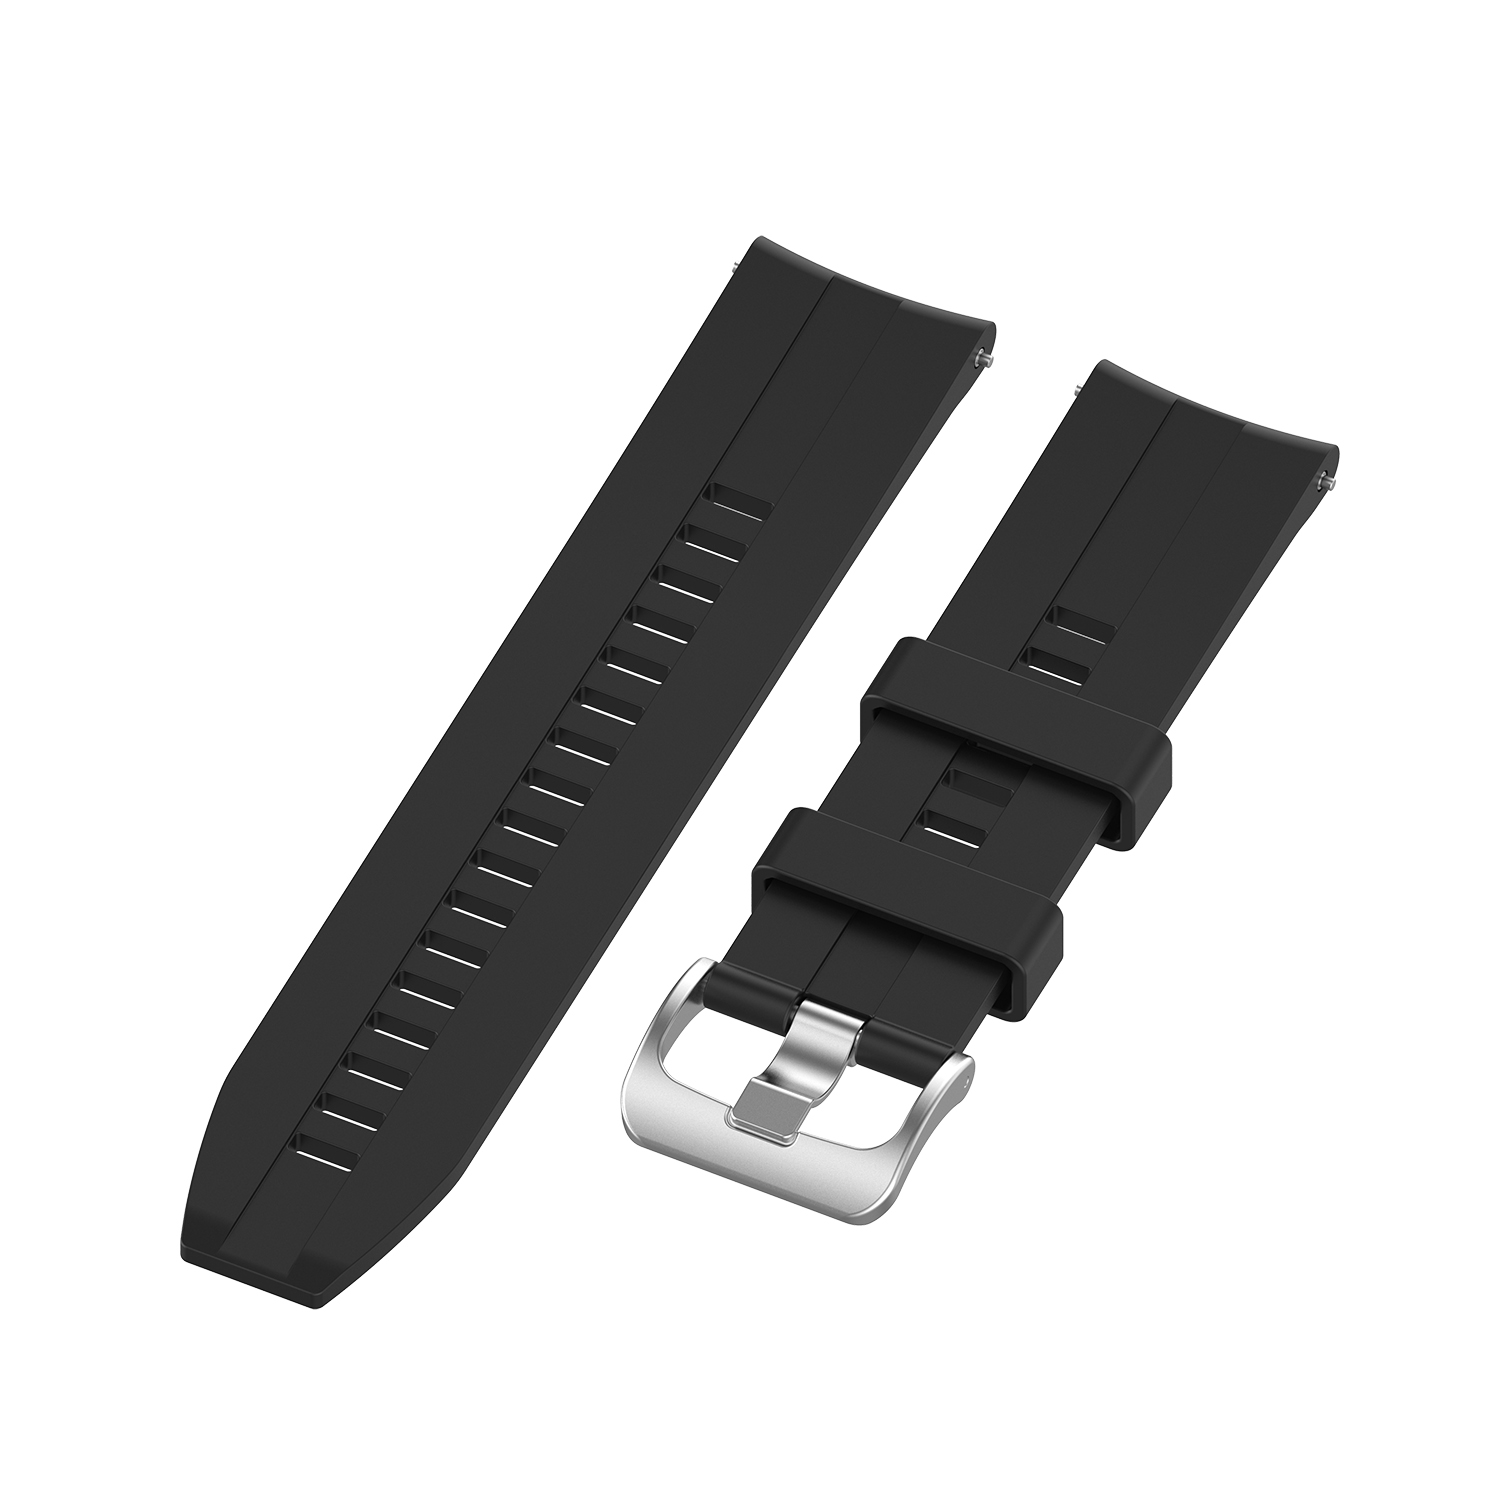 20mm-Pure-Color-Watch-Strap-Watch-Band-for-Huawei-Honor-Watch-ES-Haylou-LS02-BlitzWolfreg-BW-HL1-HL2-1781219-1